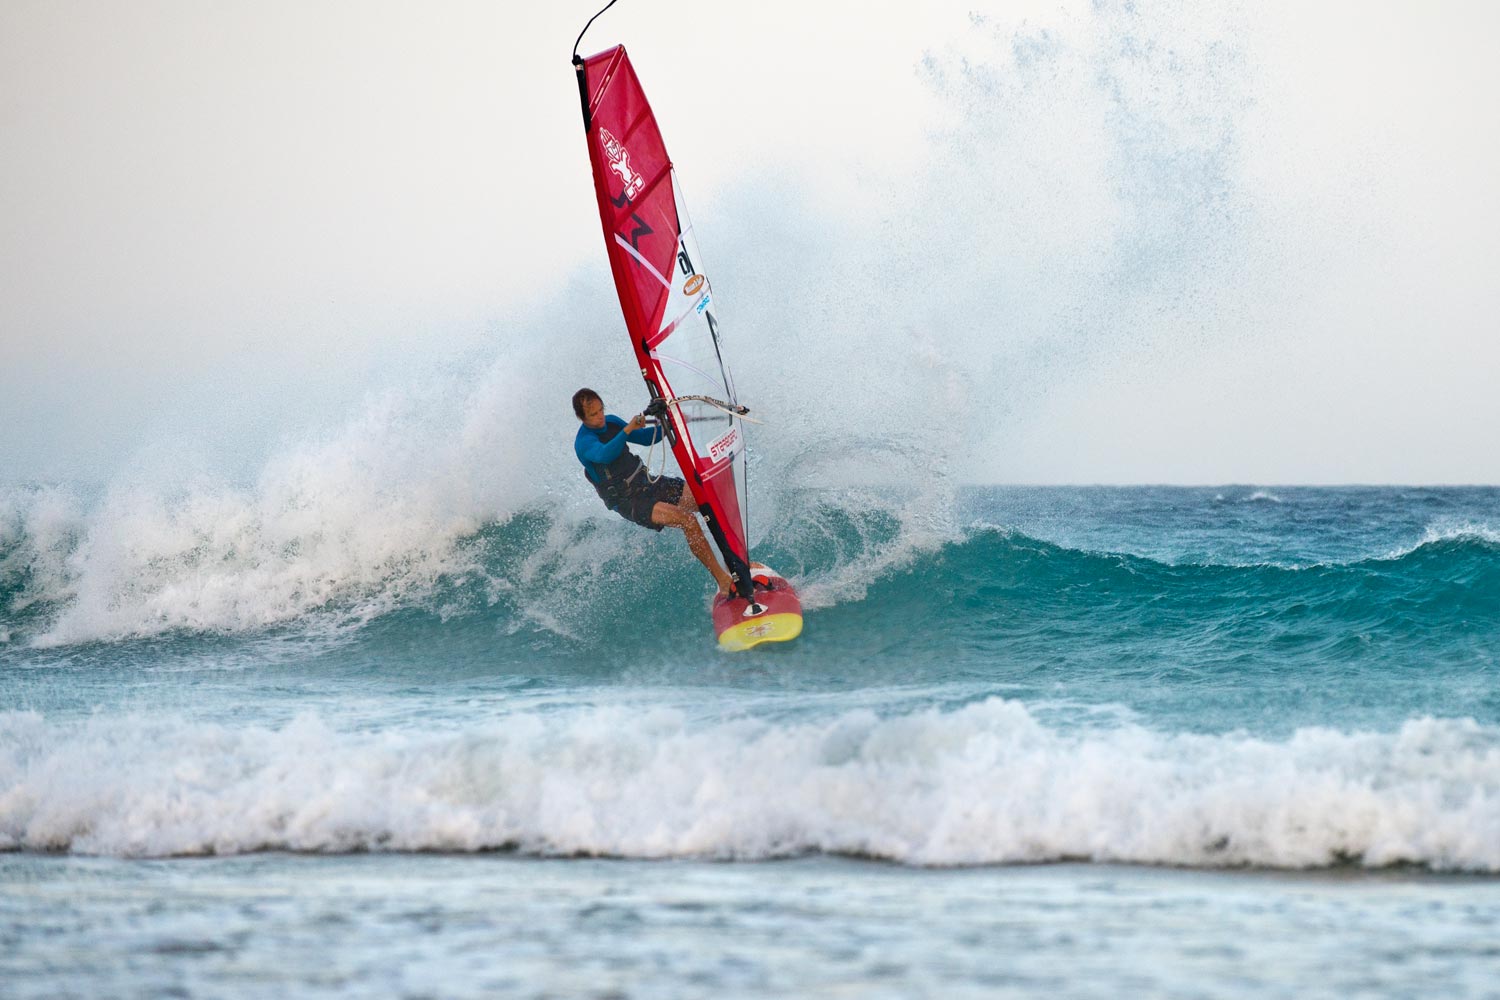 Riding a wave at Risco el Paso in Fuerteventura with the 4G 4.0 m in 2017 (Photo: ©Kerstin Reiger)